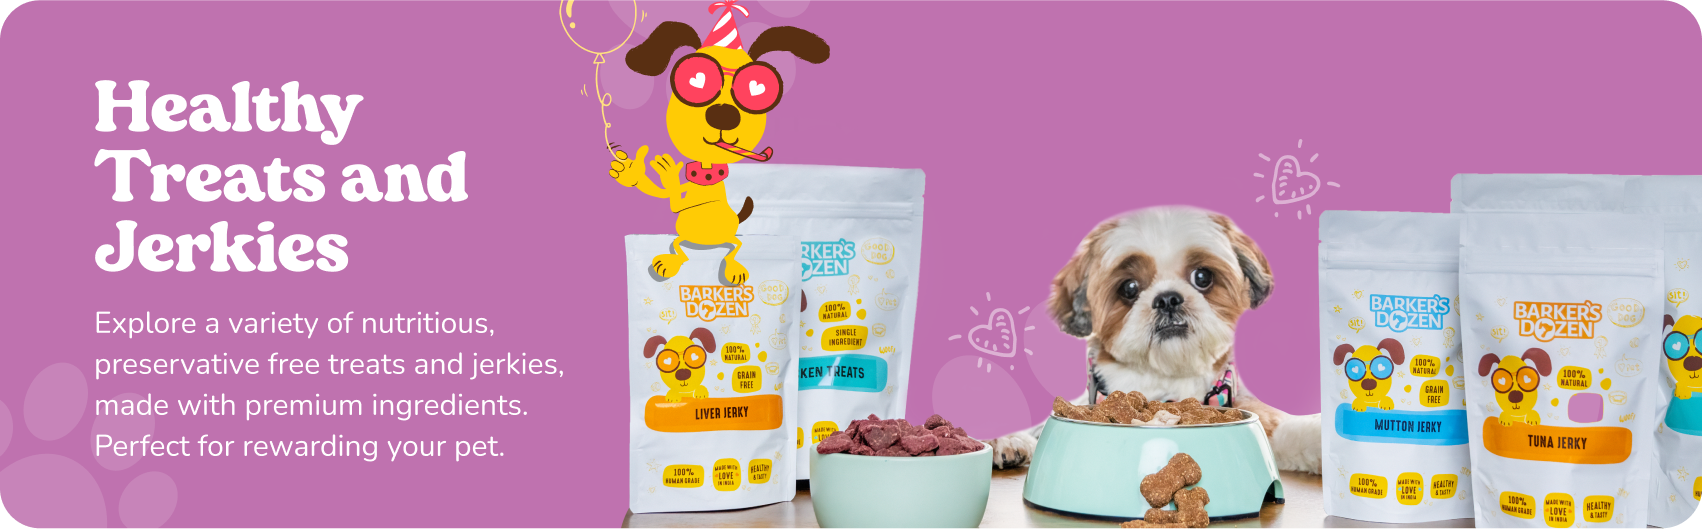 preservative free treats and chews for dogs, premium ingredients